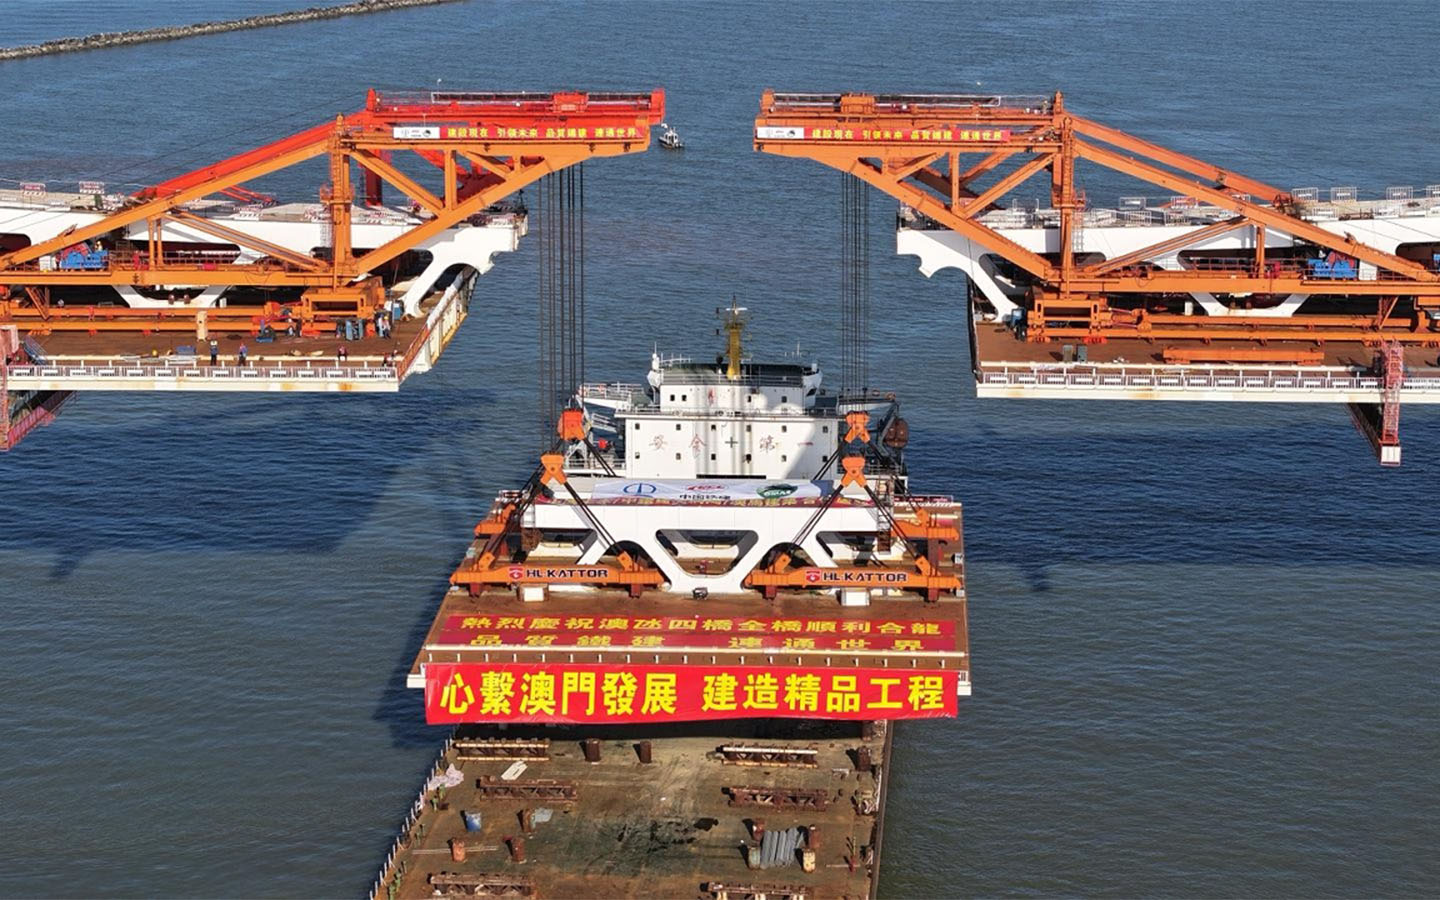 The main structure of the fourth Macao-Taipa bridge has been completed